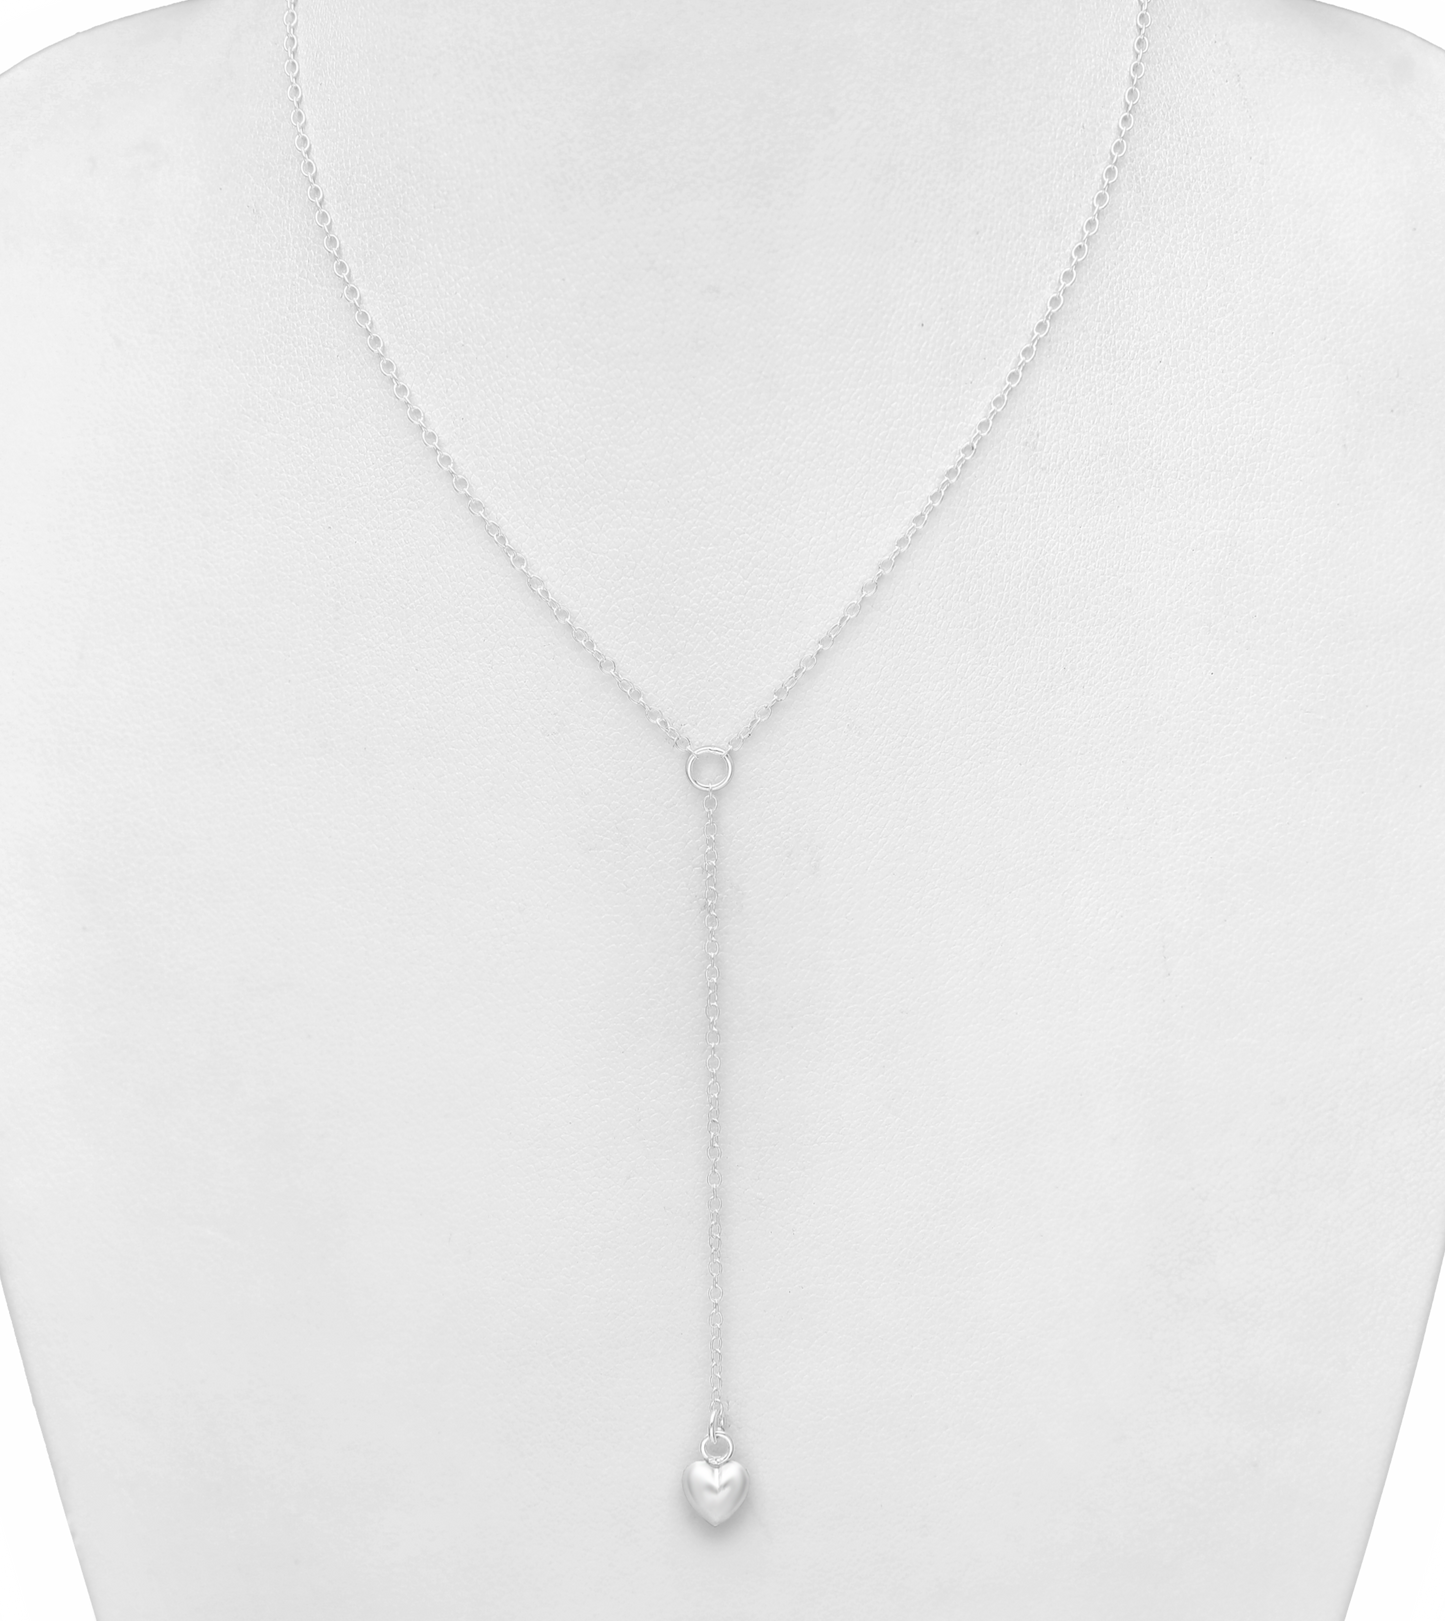 Sterling Silver Y Drop Necklace Featuring Heart Charm